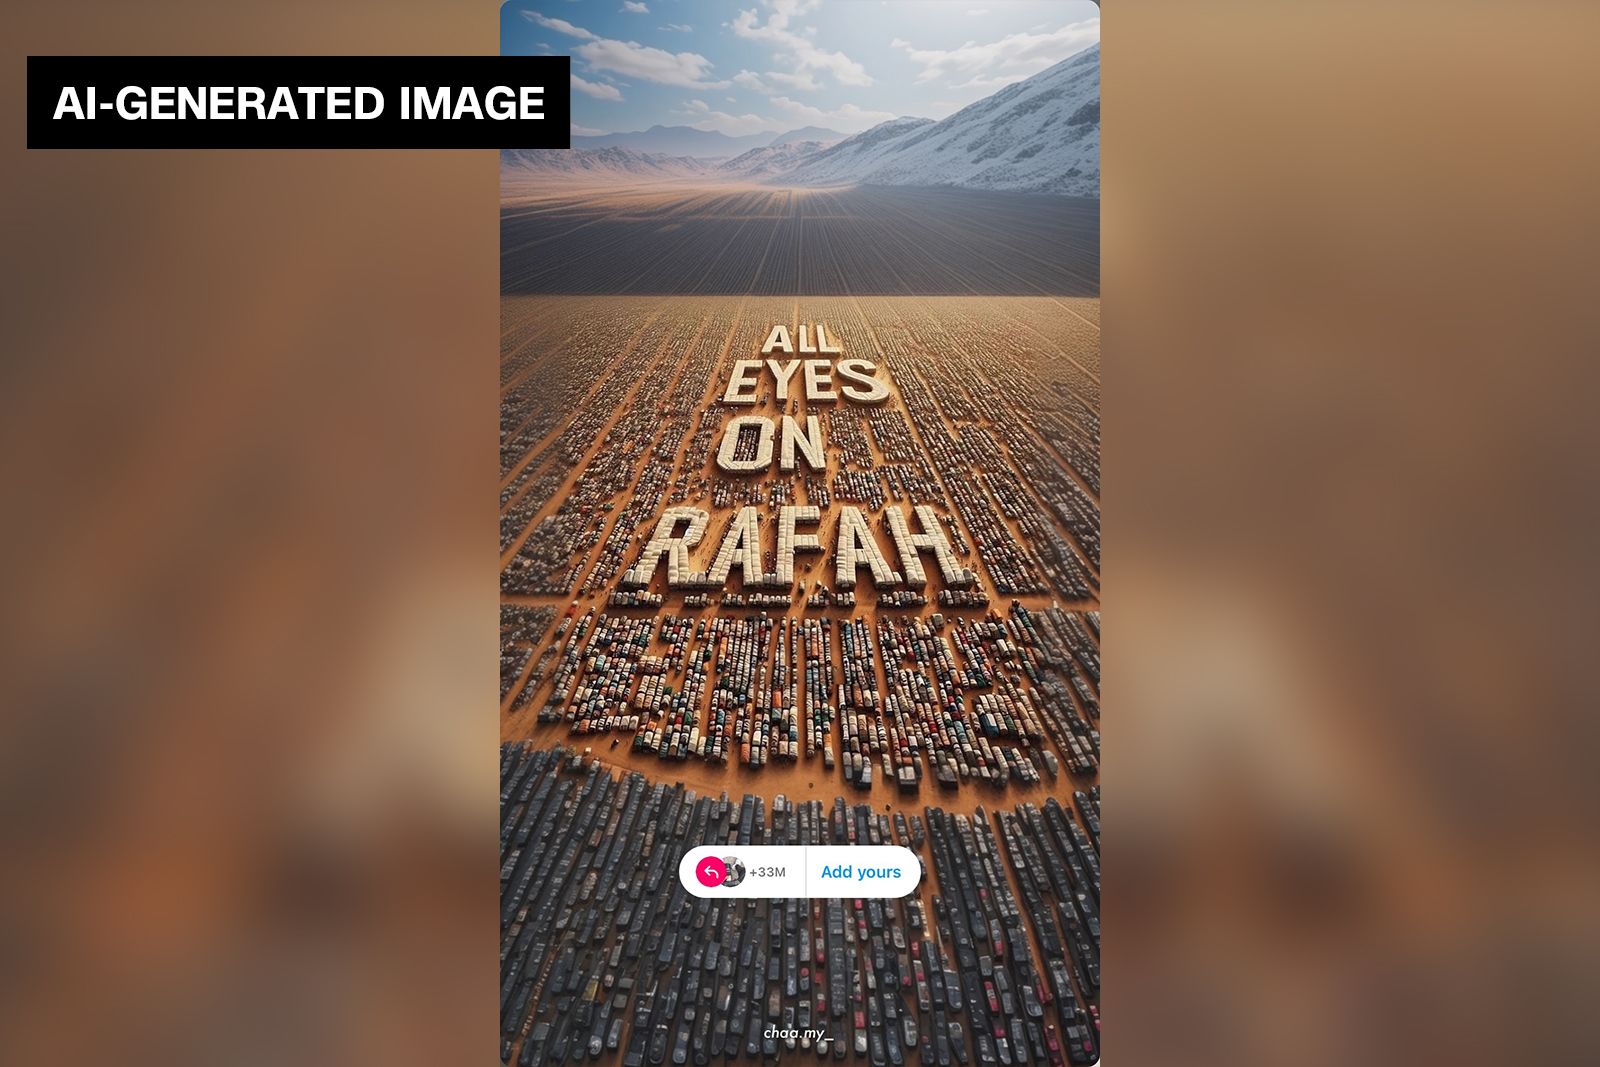 An AI-generated image stating "All Eyes on Rafah" has been shared millions of times on social media.